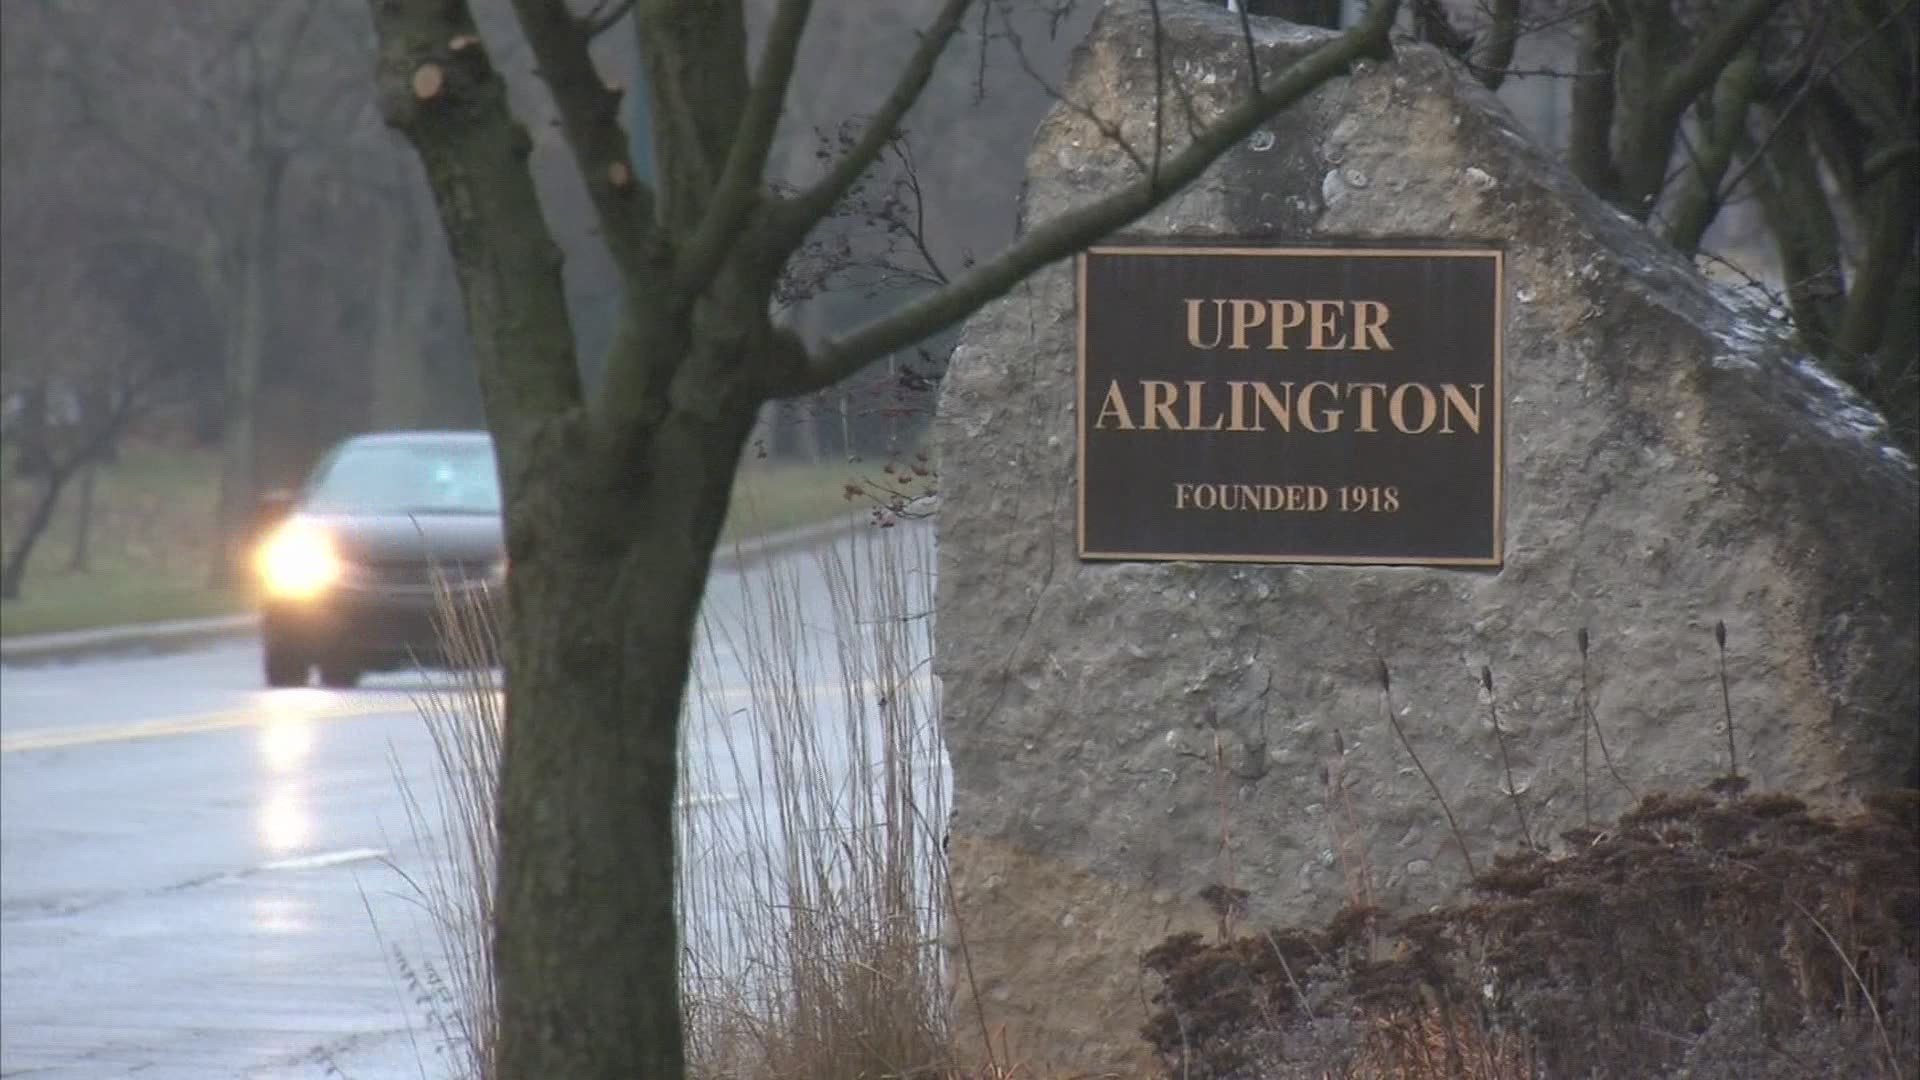 When reached by phone on Sunday, Dr. Mary Kate Francis told 10TV any information would have to come from Upper Arlington police.